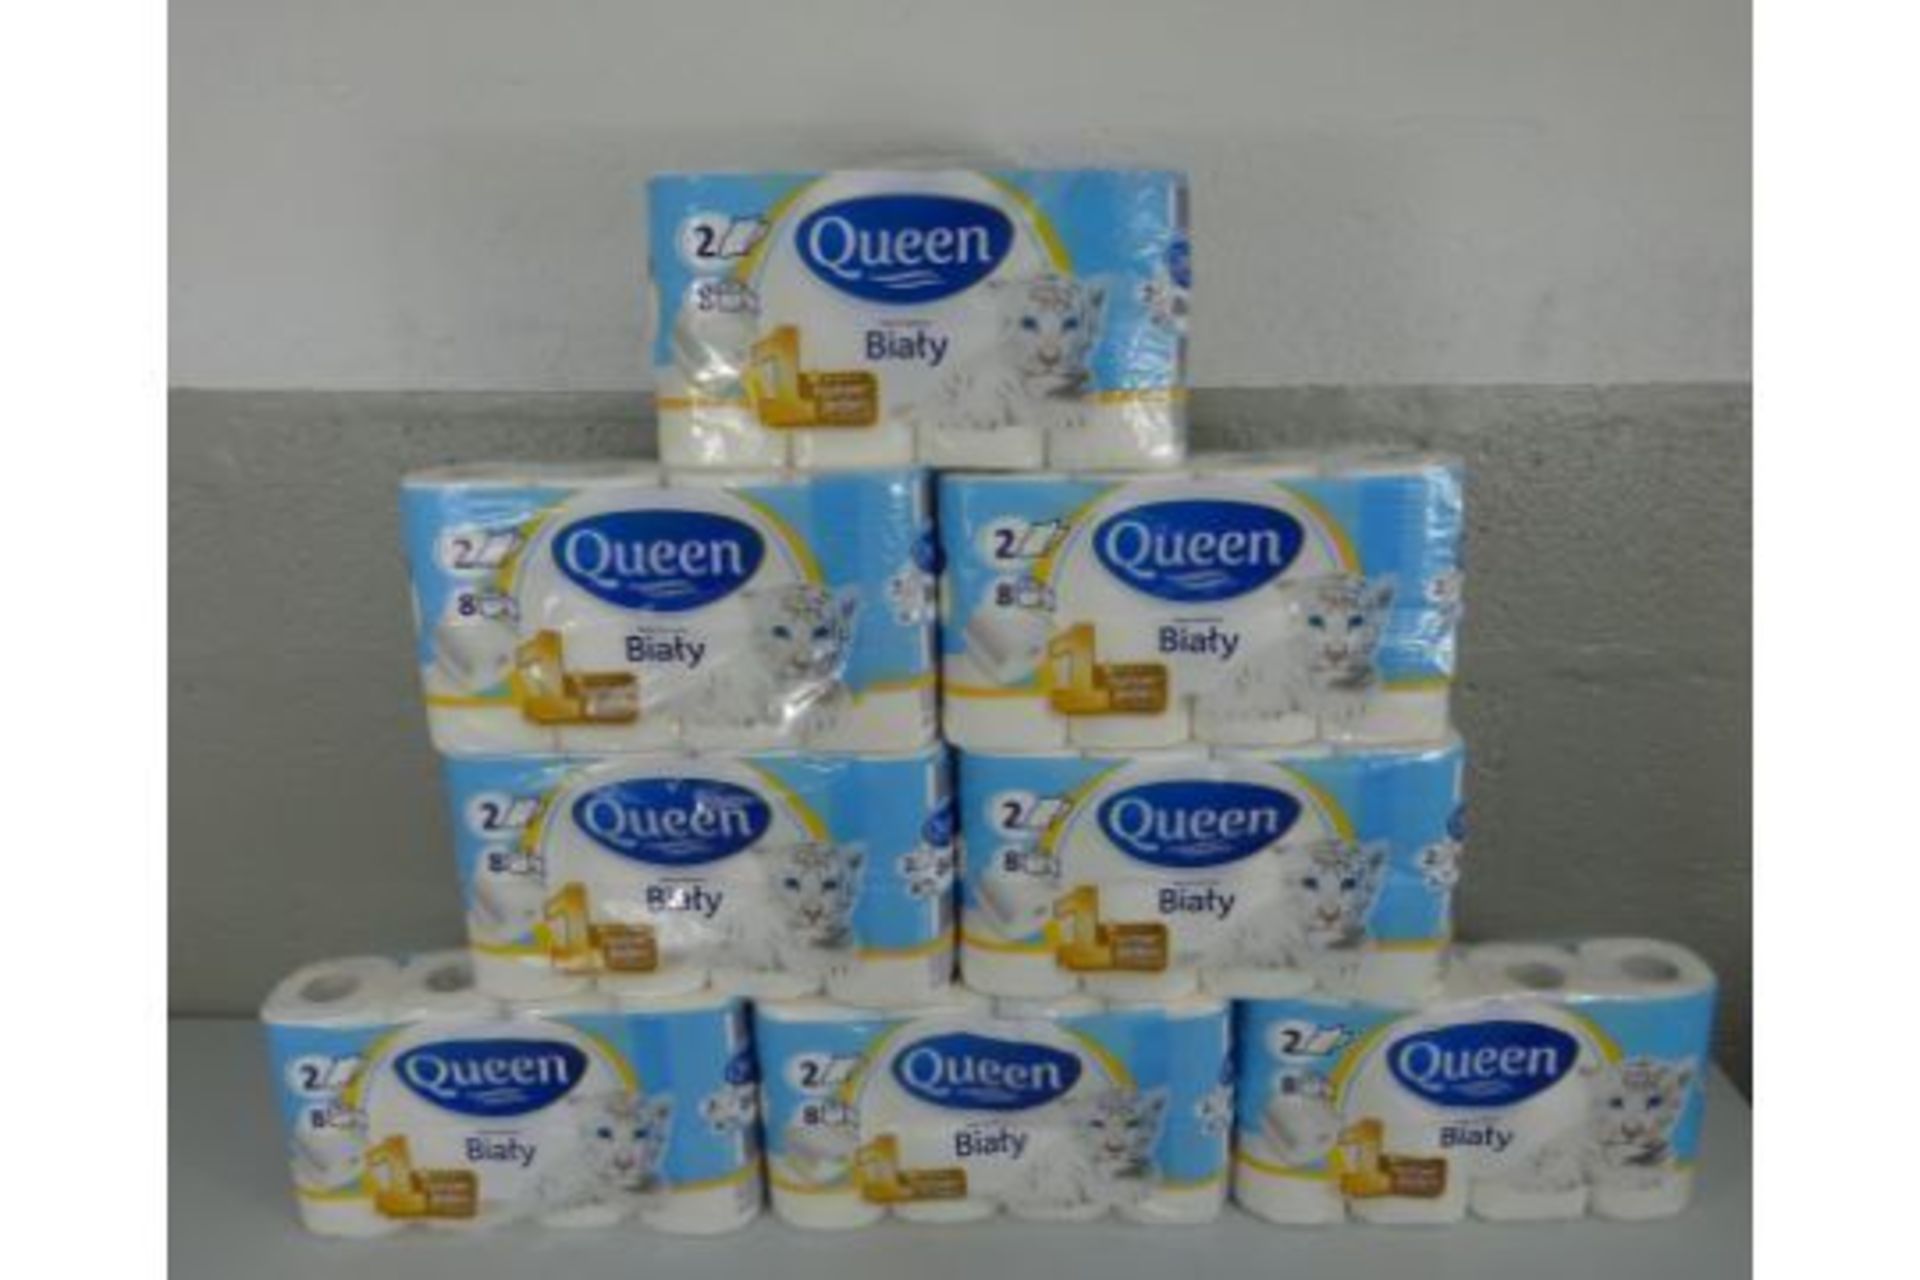 x8 New Packs of 8 Rolls 2 Ply Toilet Roll - 64 Rolls In Total